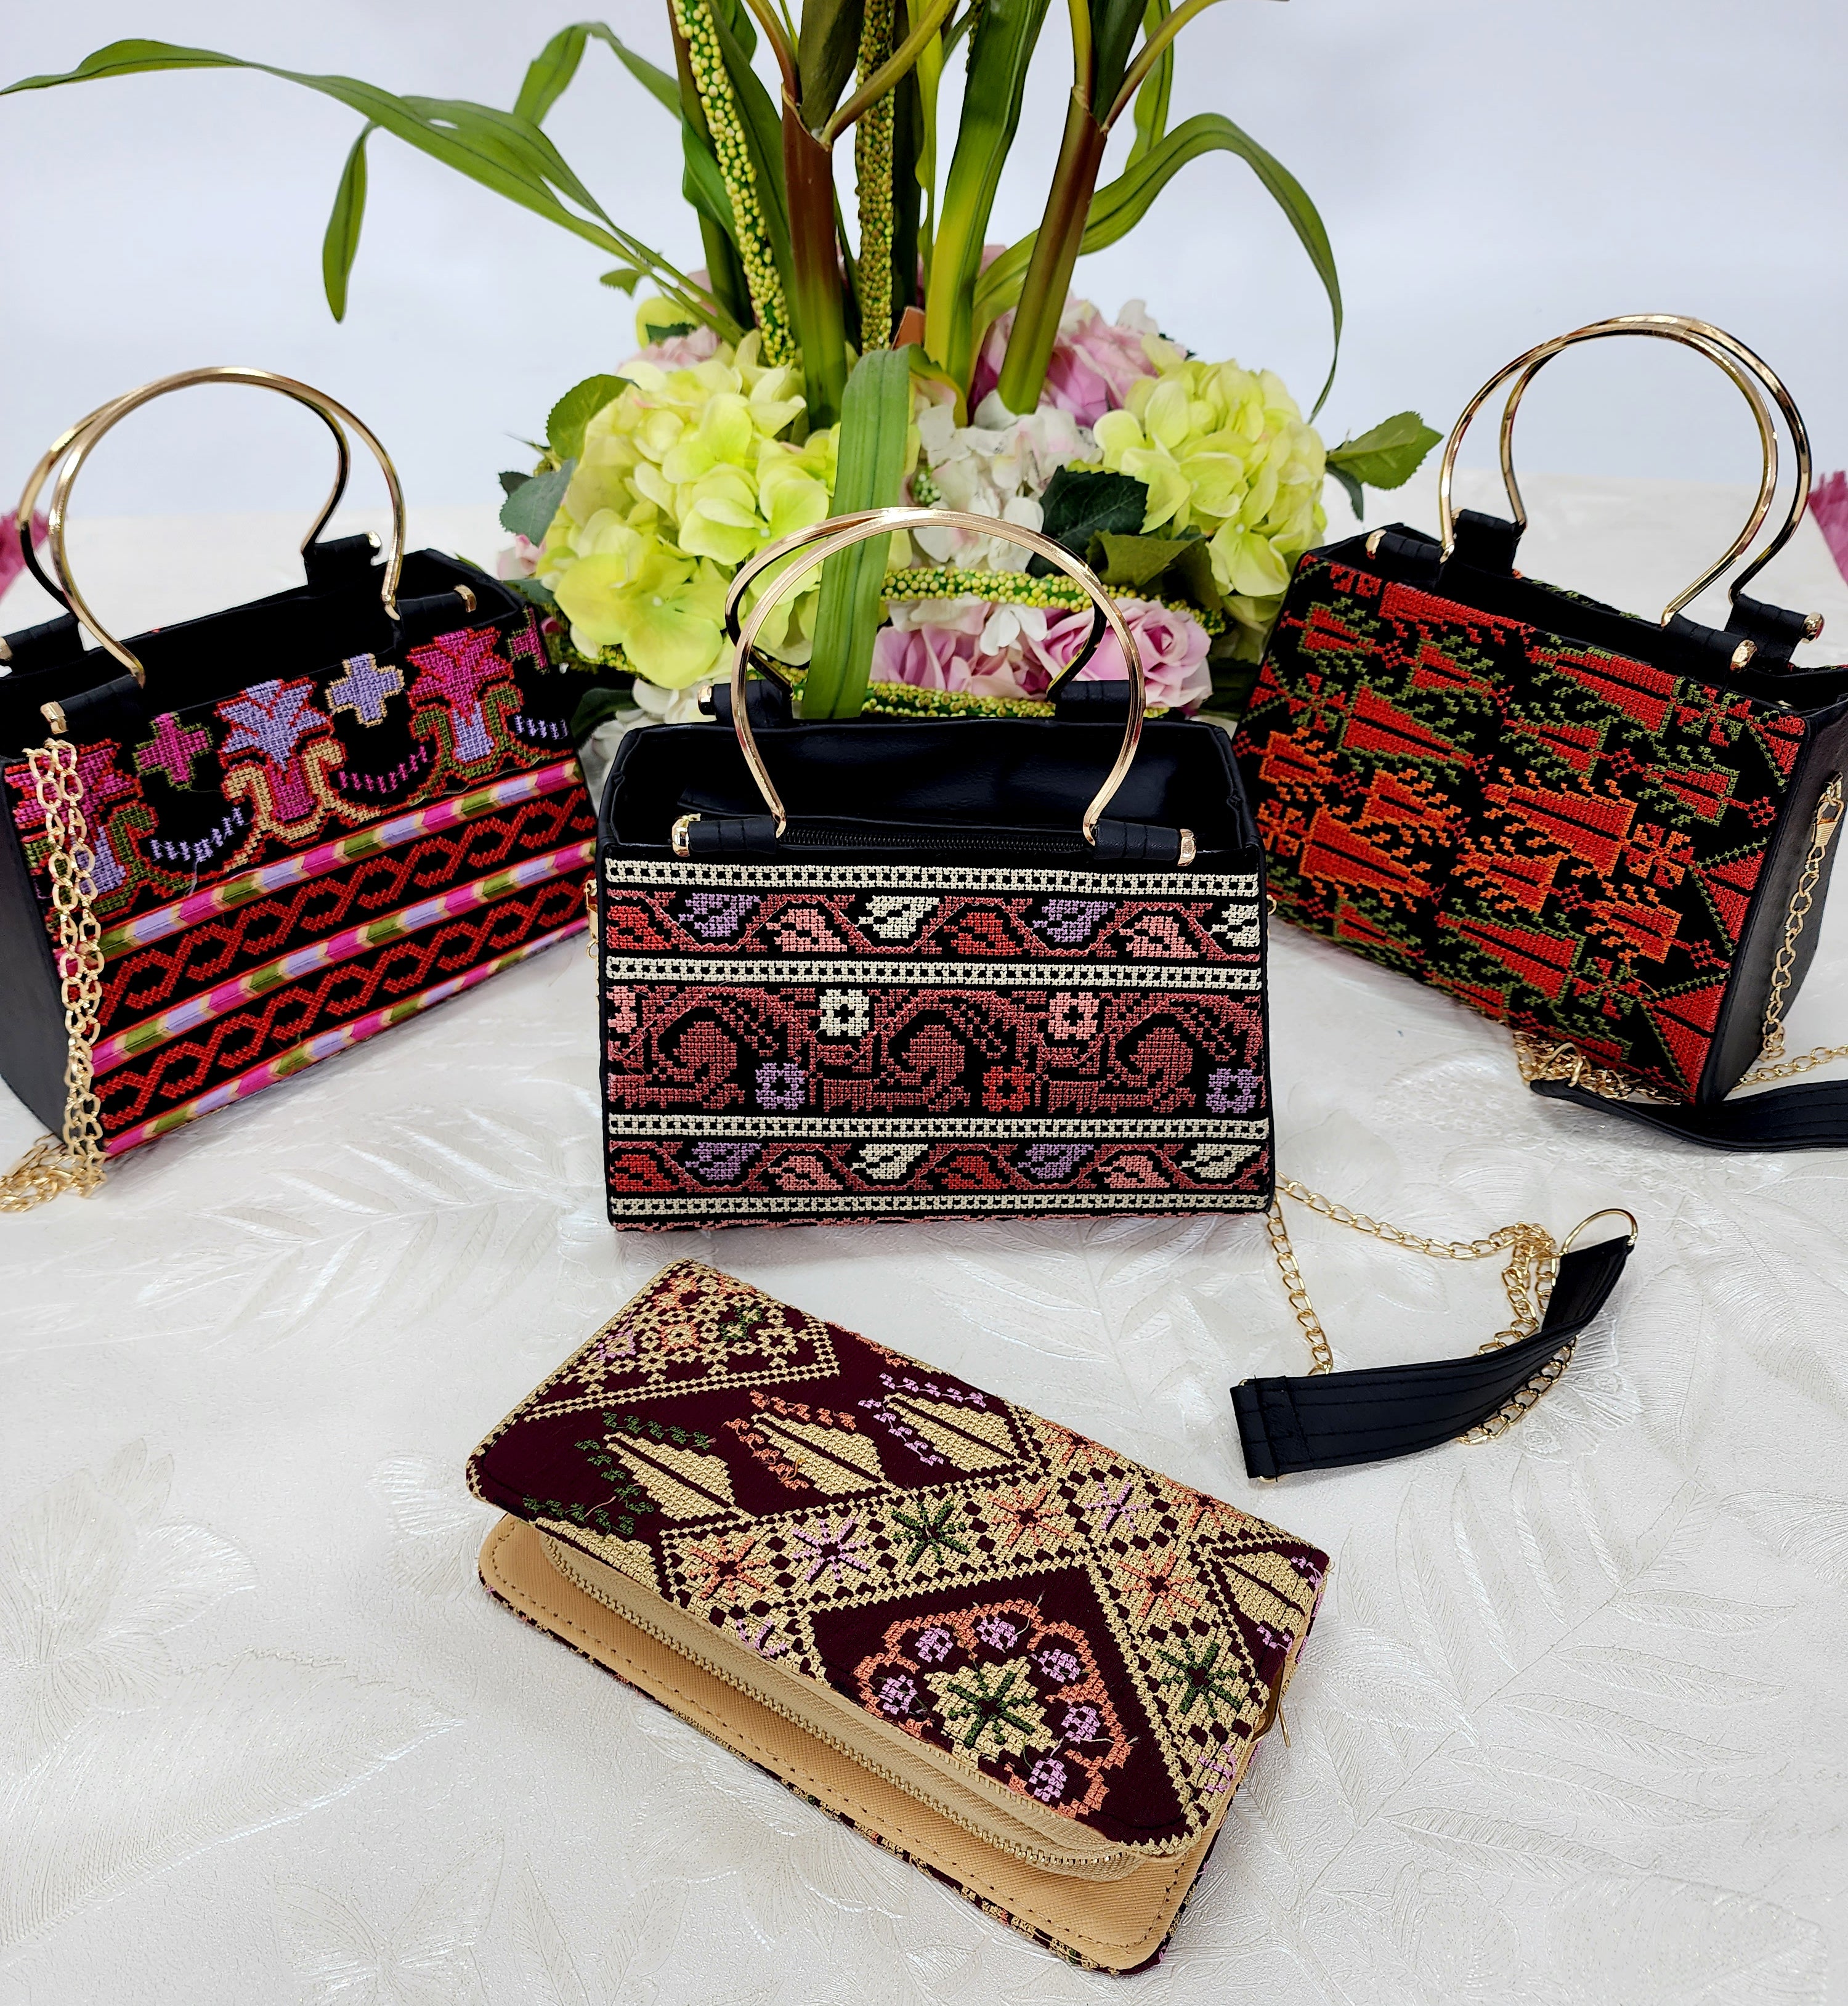 Embroidered accessories from the Fida Beauty 2023 collection